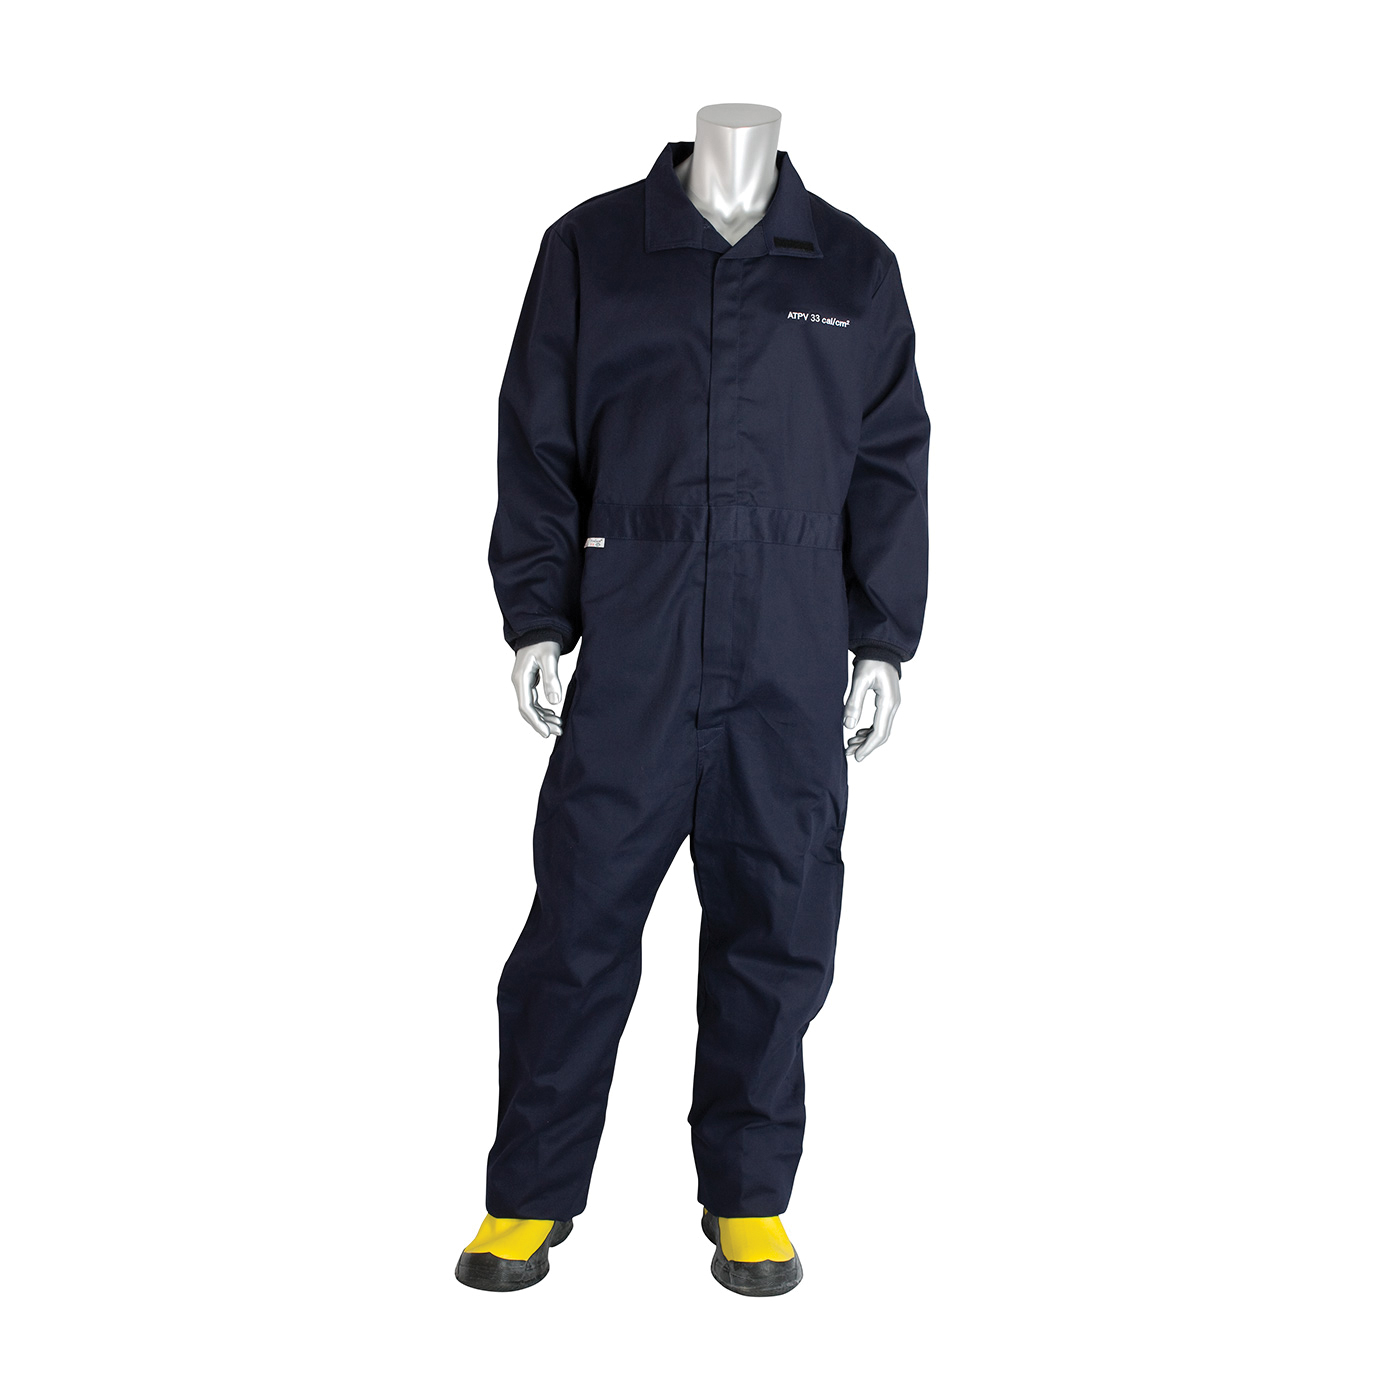 PIP® 9100-52758/S Flame Resistant Coverall, S, Navy, 88% Cotton/12% Nylon, 36 to 38 in Chest, 32 in L Inseam